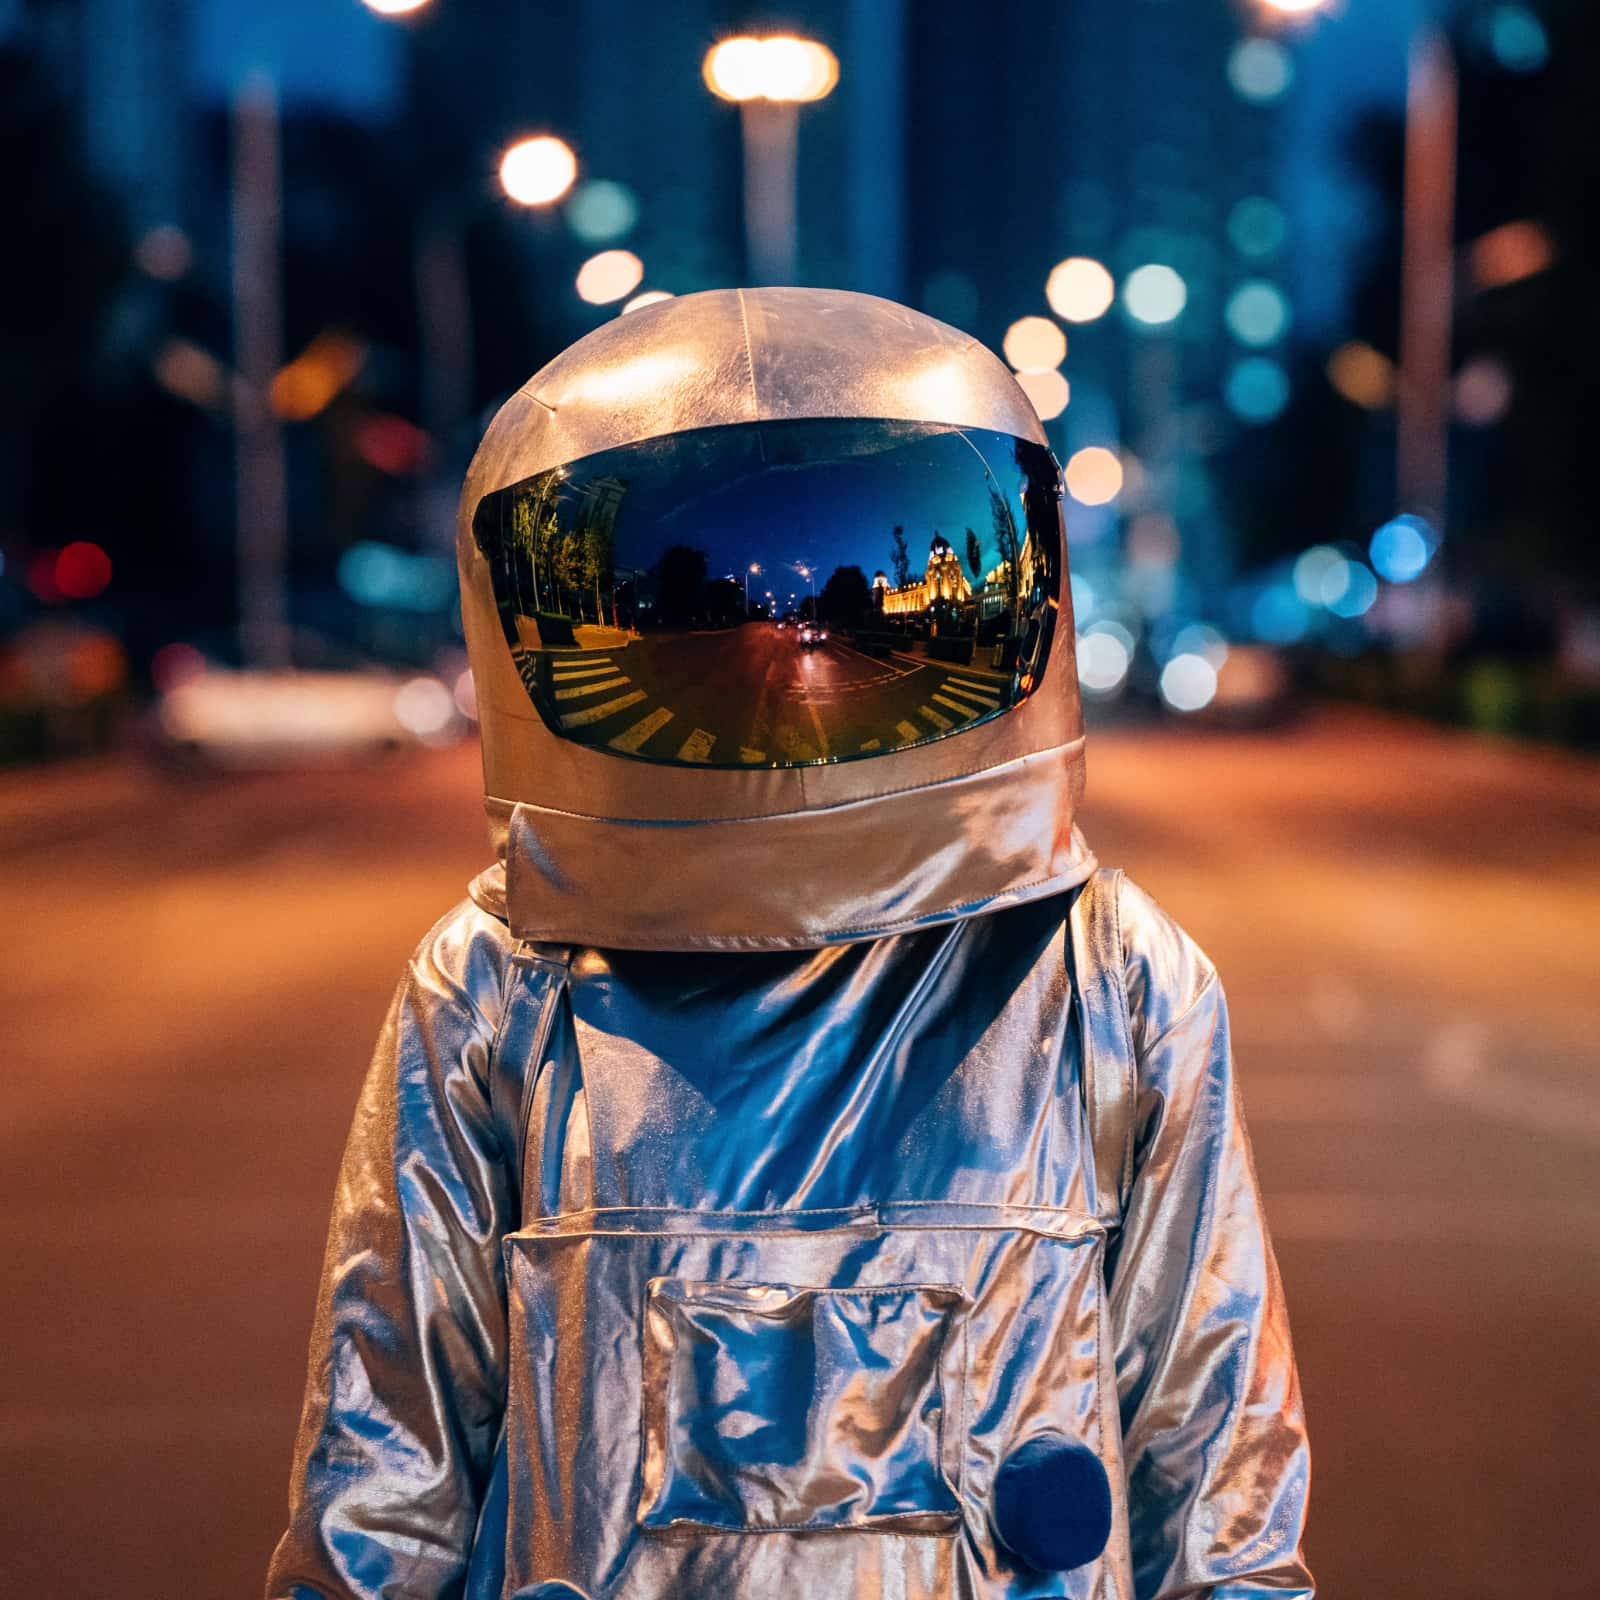 Spaceman on a street in a city at night